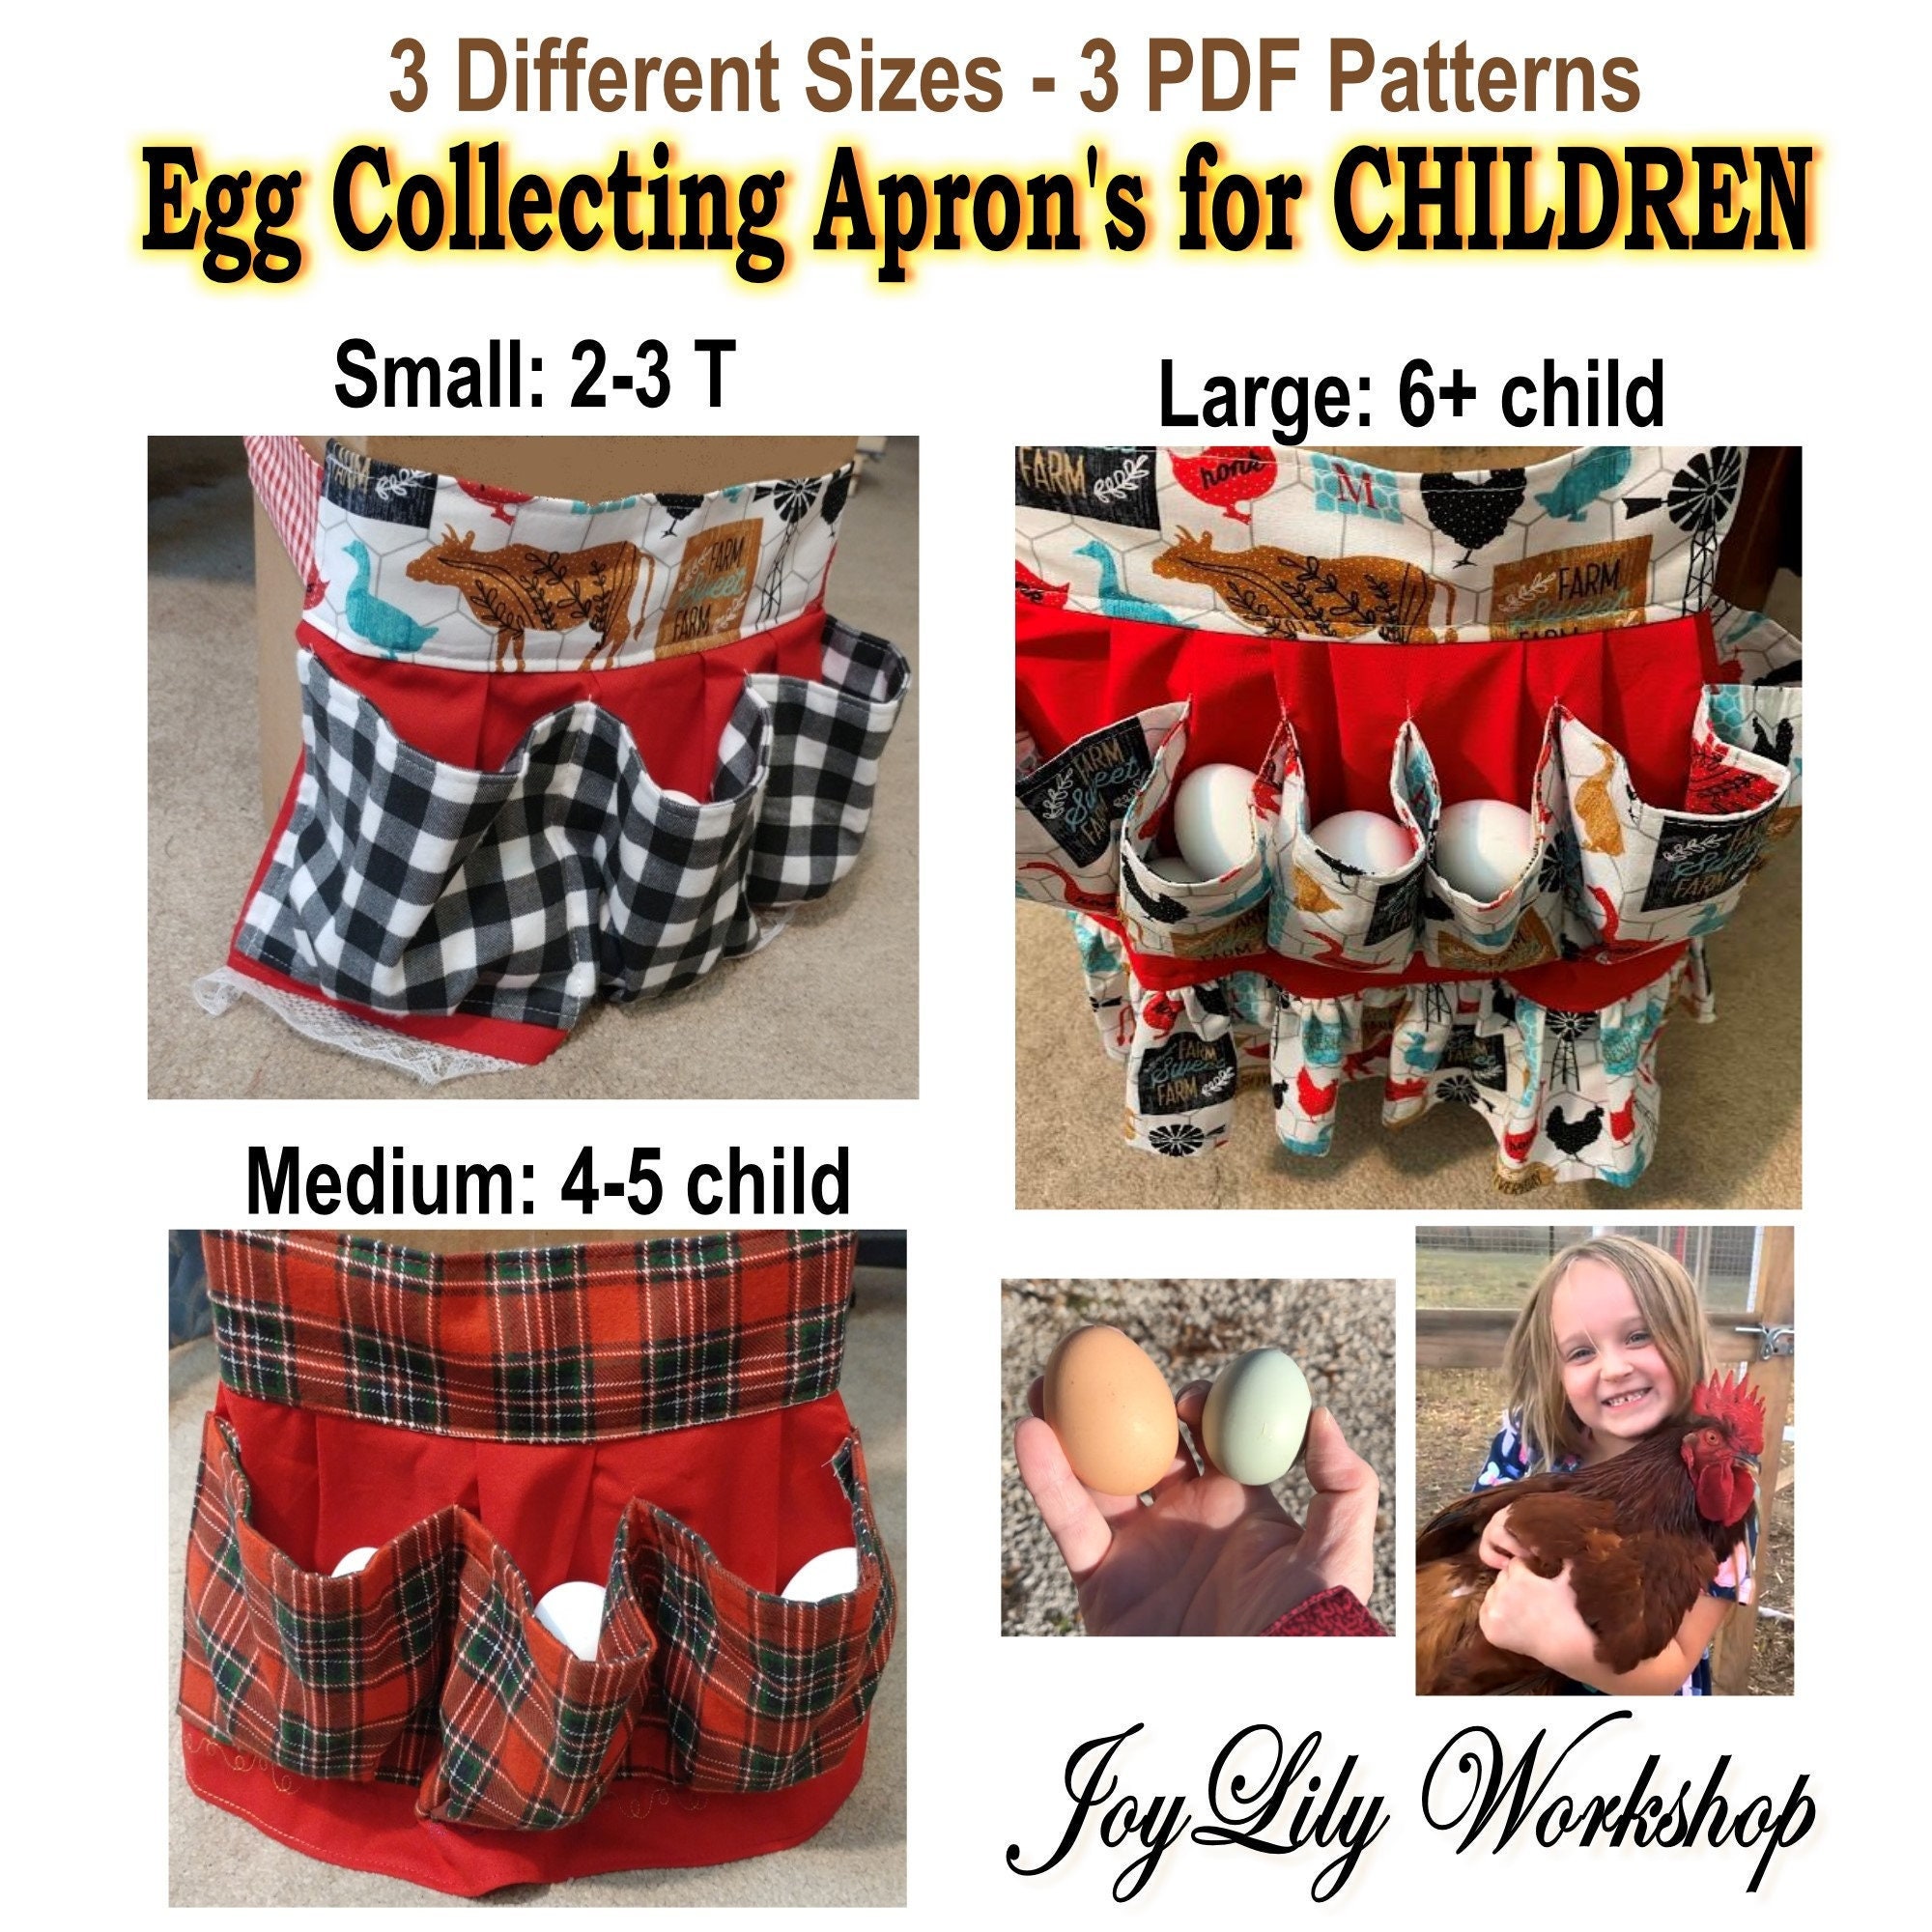 Fluffy Layers® Kids Egg Collecting Aprons - My Favorite Chicken